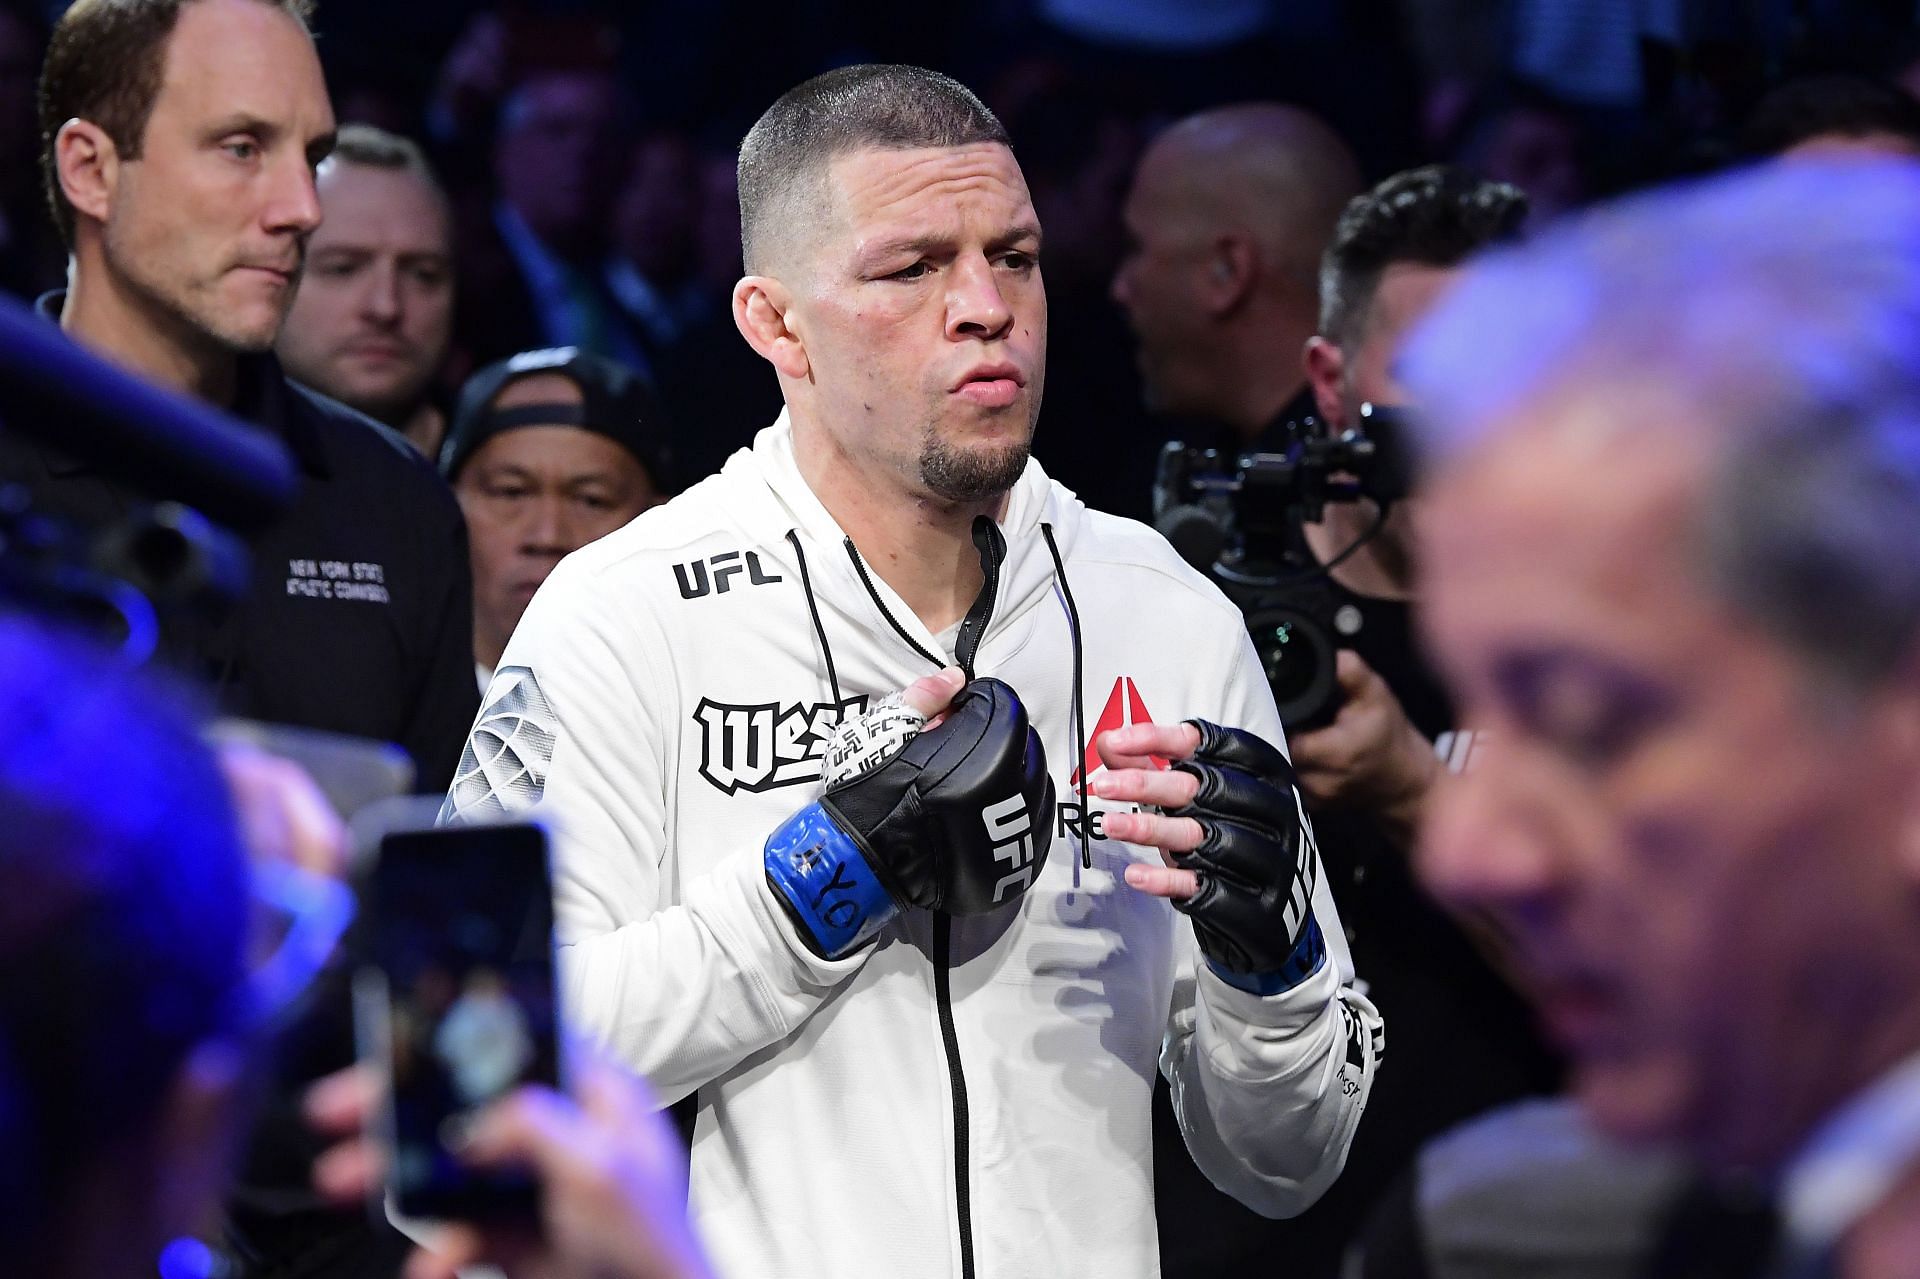 Could 2022 finally see the trilogy bout between Conor McGregor and Nate Diaz?